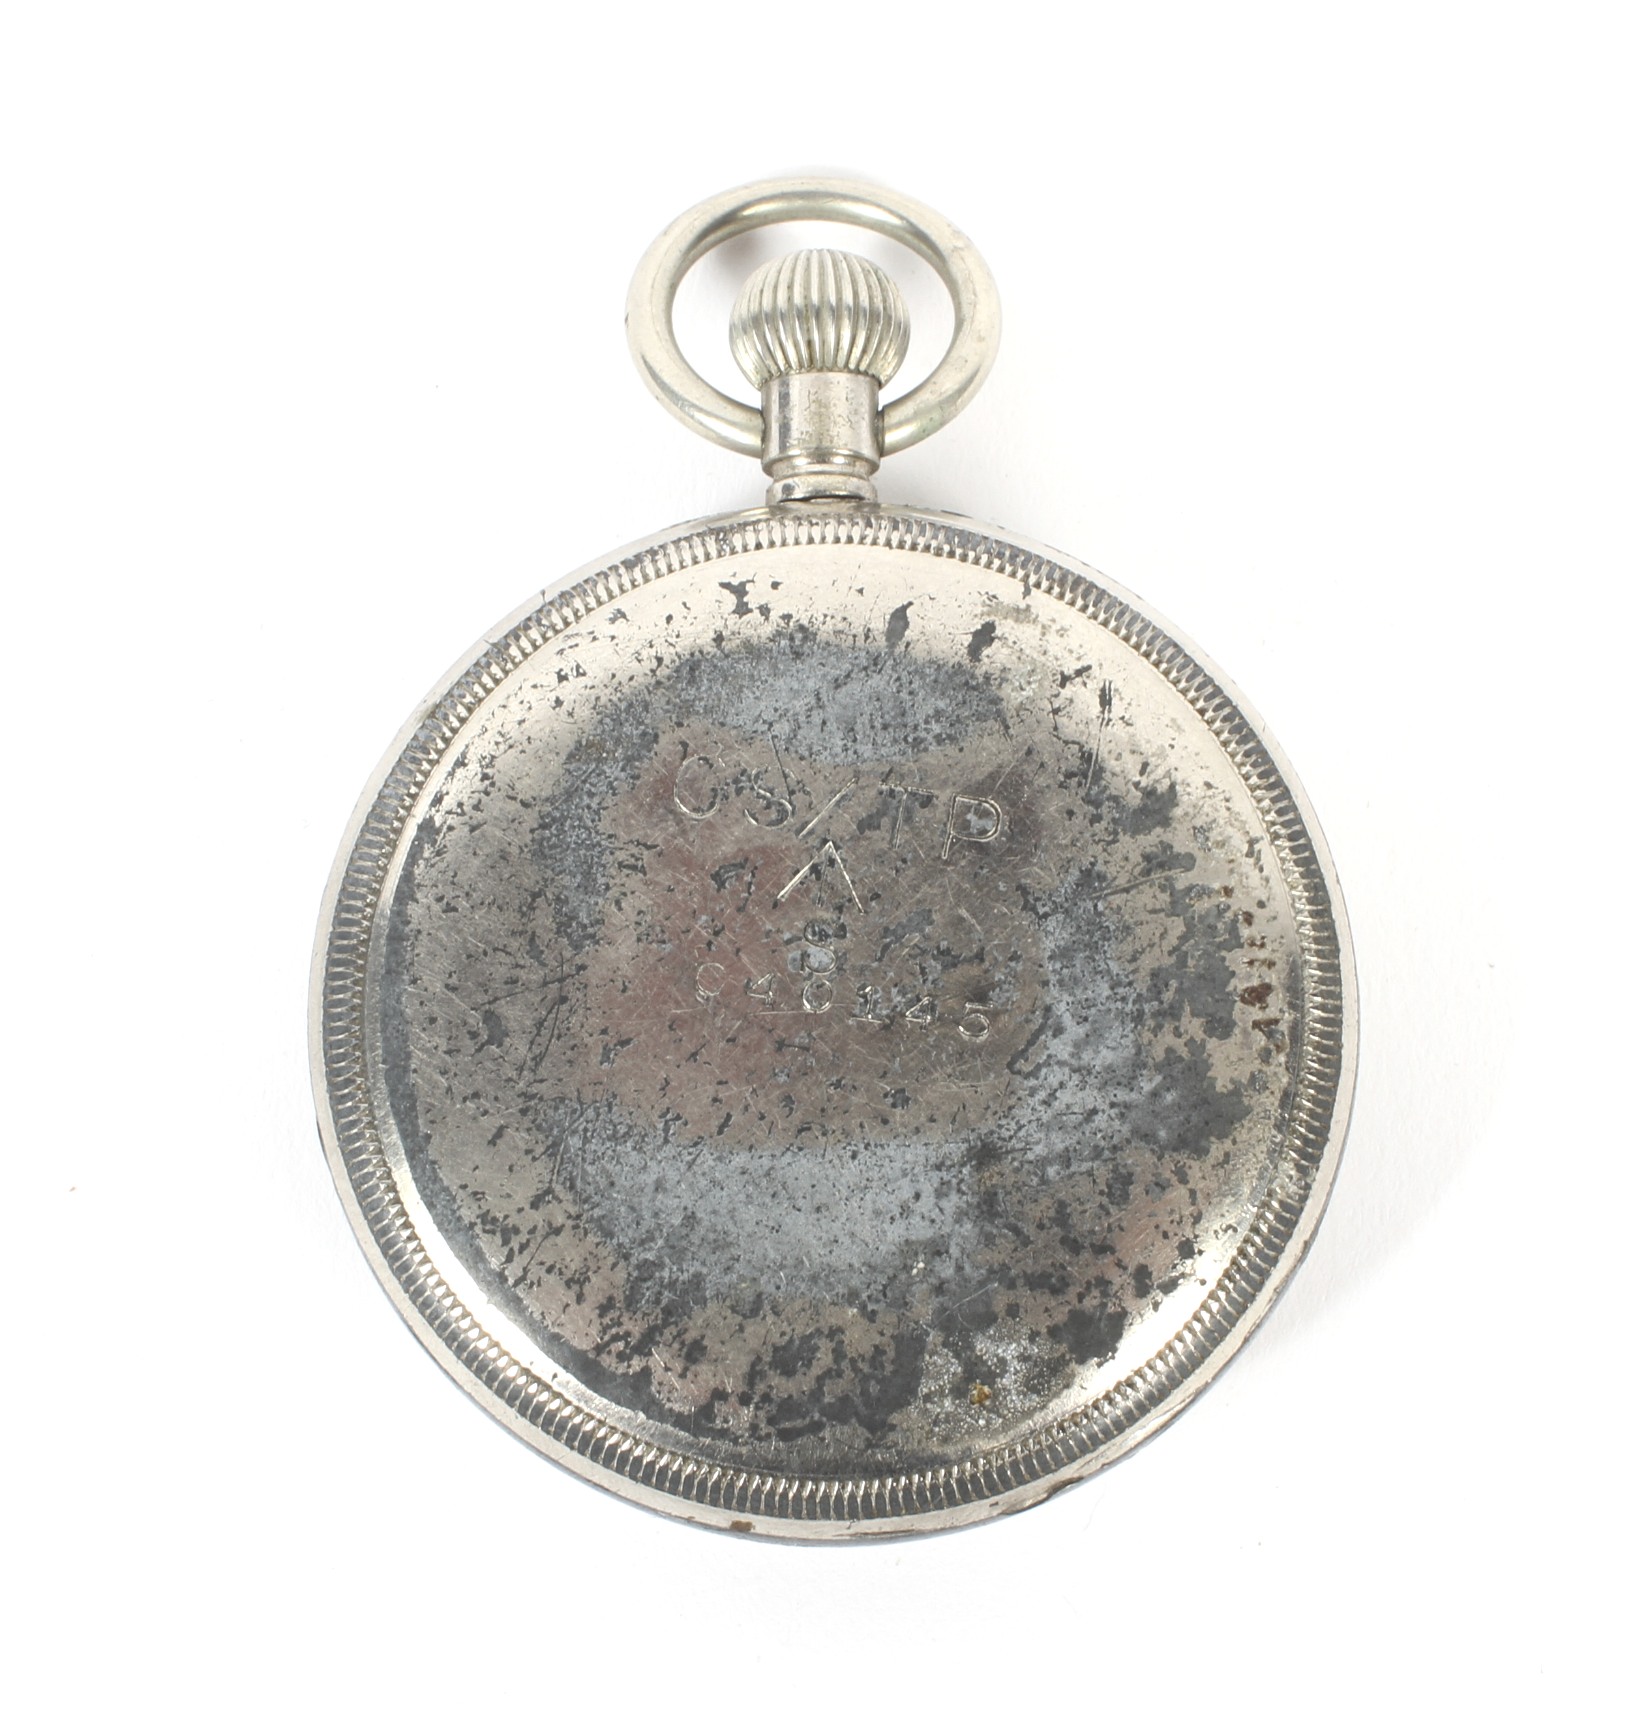 An early 20th century military pocket watch. - Image 2 of 2